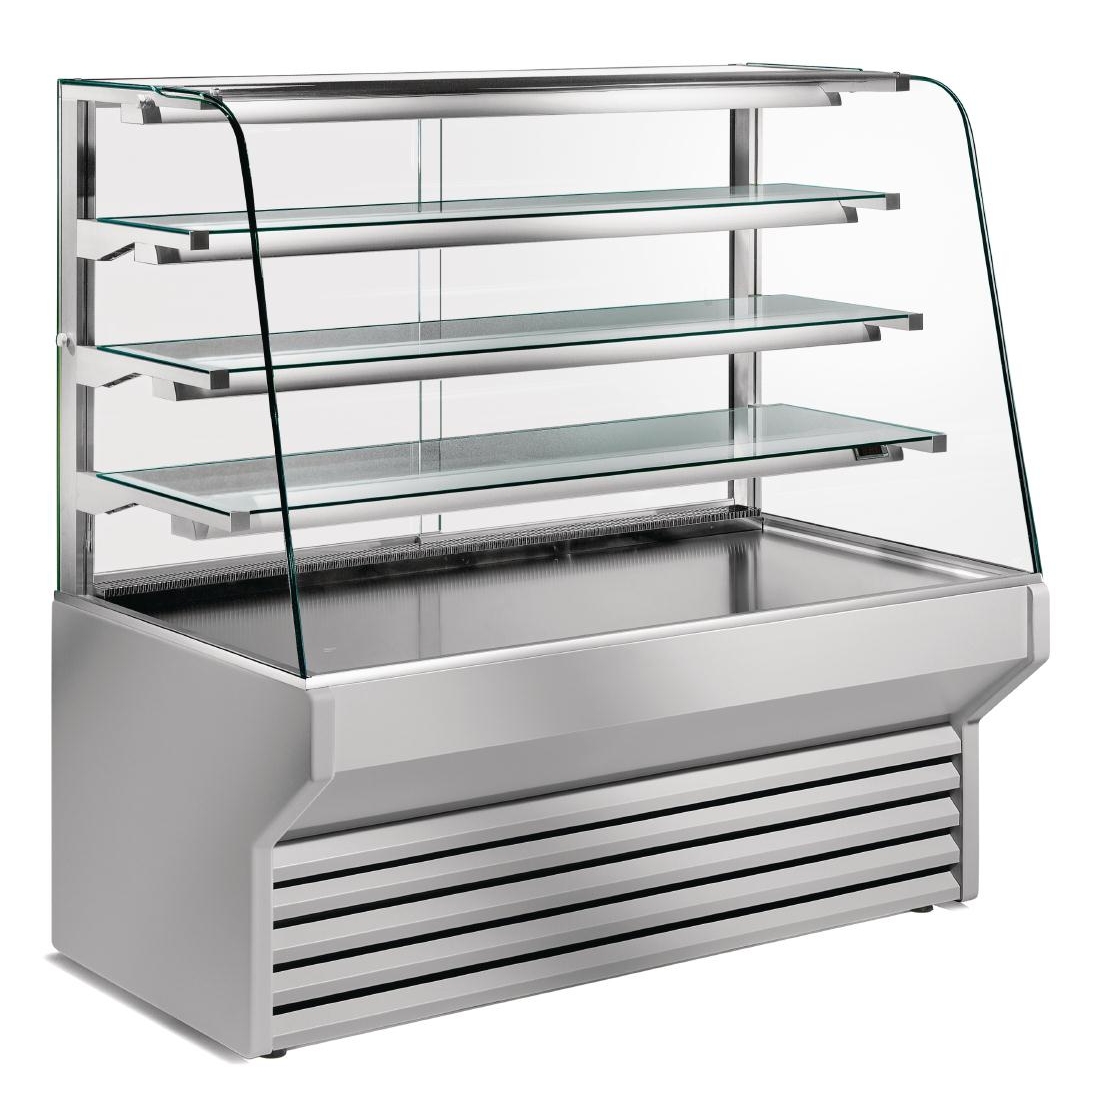 Zoin Harmony Ambient Serve Over Counter 2120mm ES212NNN